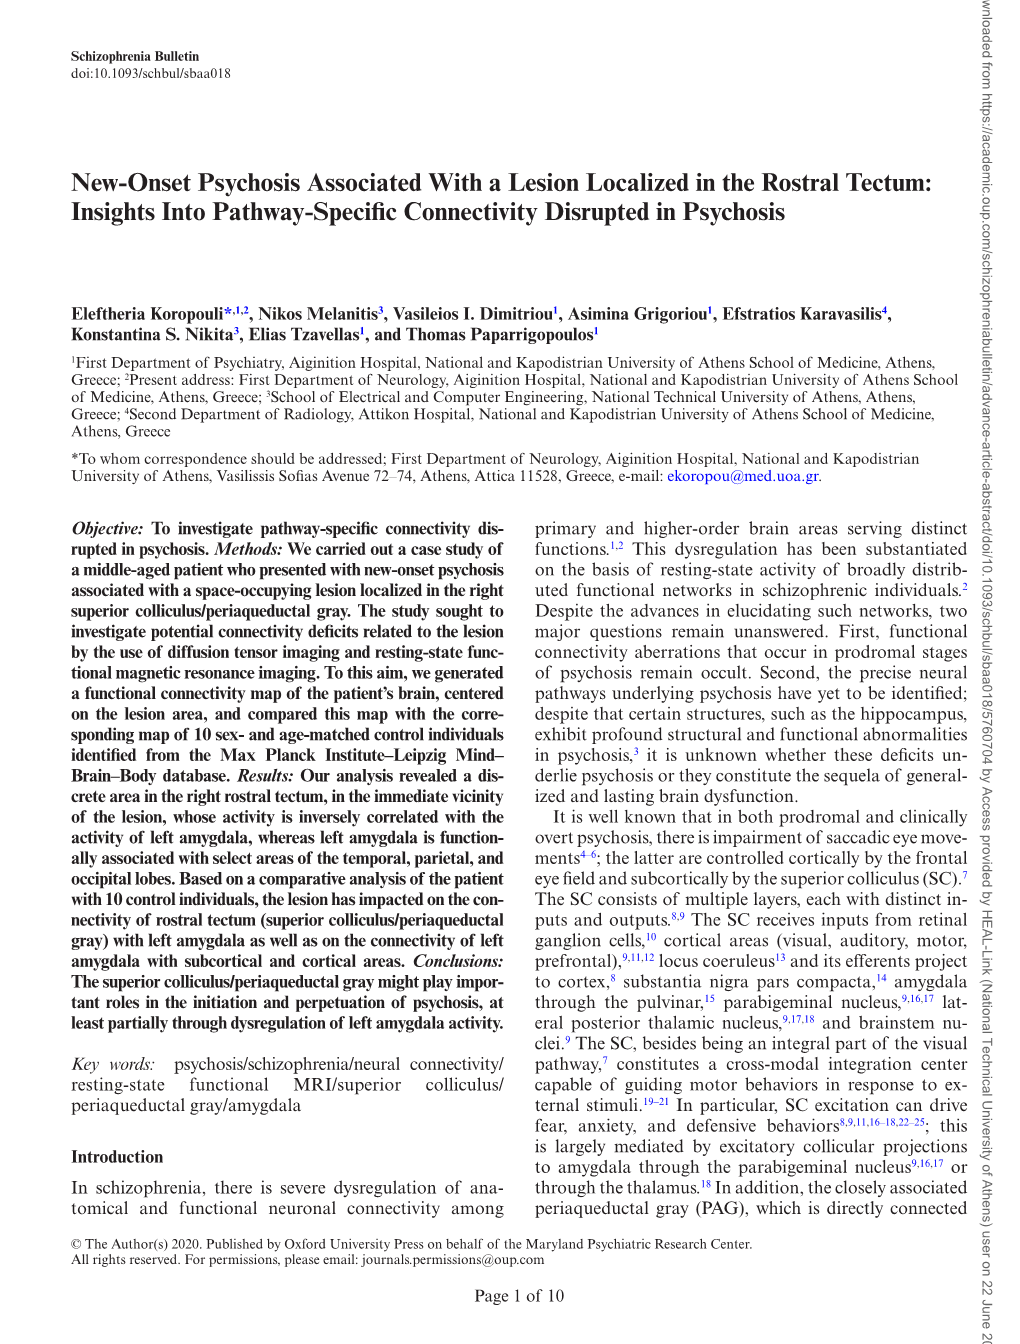 New-Onset Psychosis Associated with a Lesion Localized in the Rostral Tectum: Insights Into Pathway-Specific Connectivity Disrupted in Psychosis